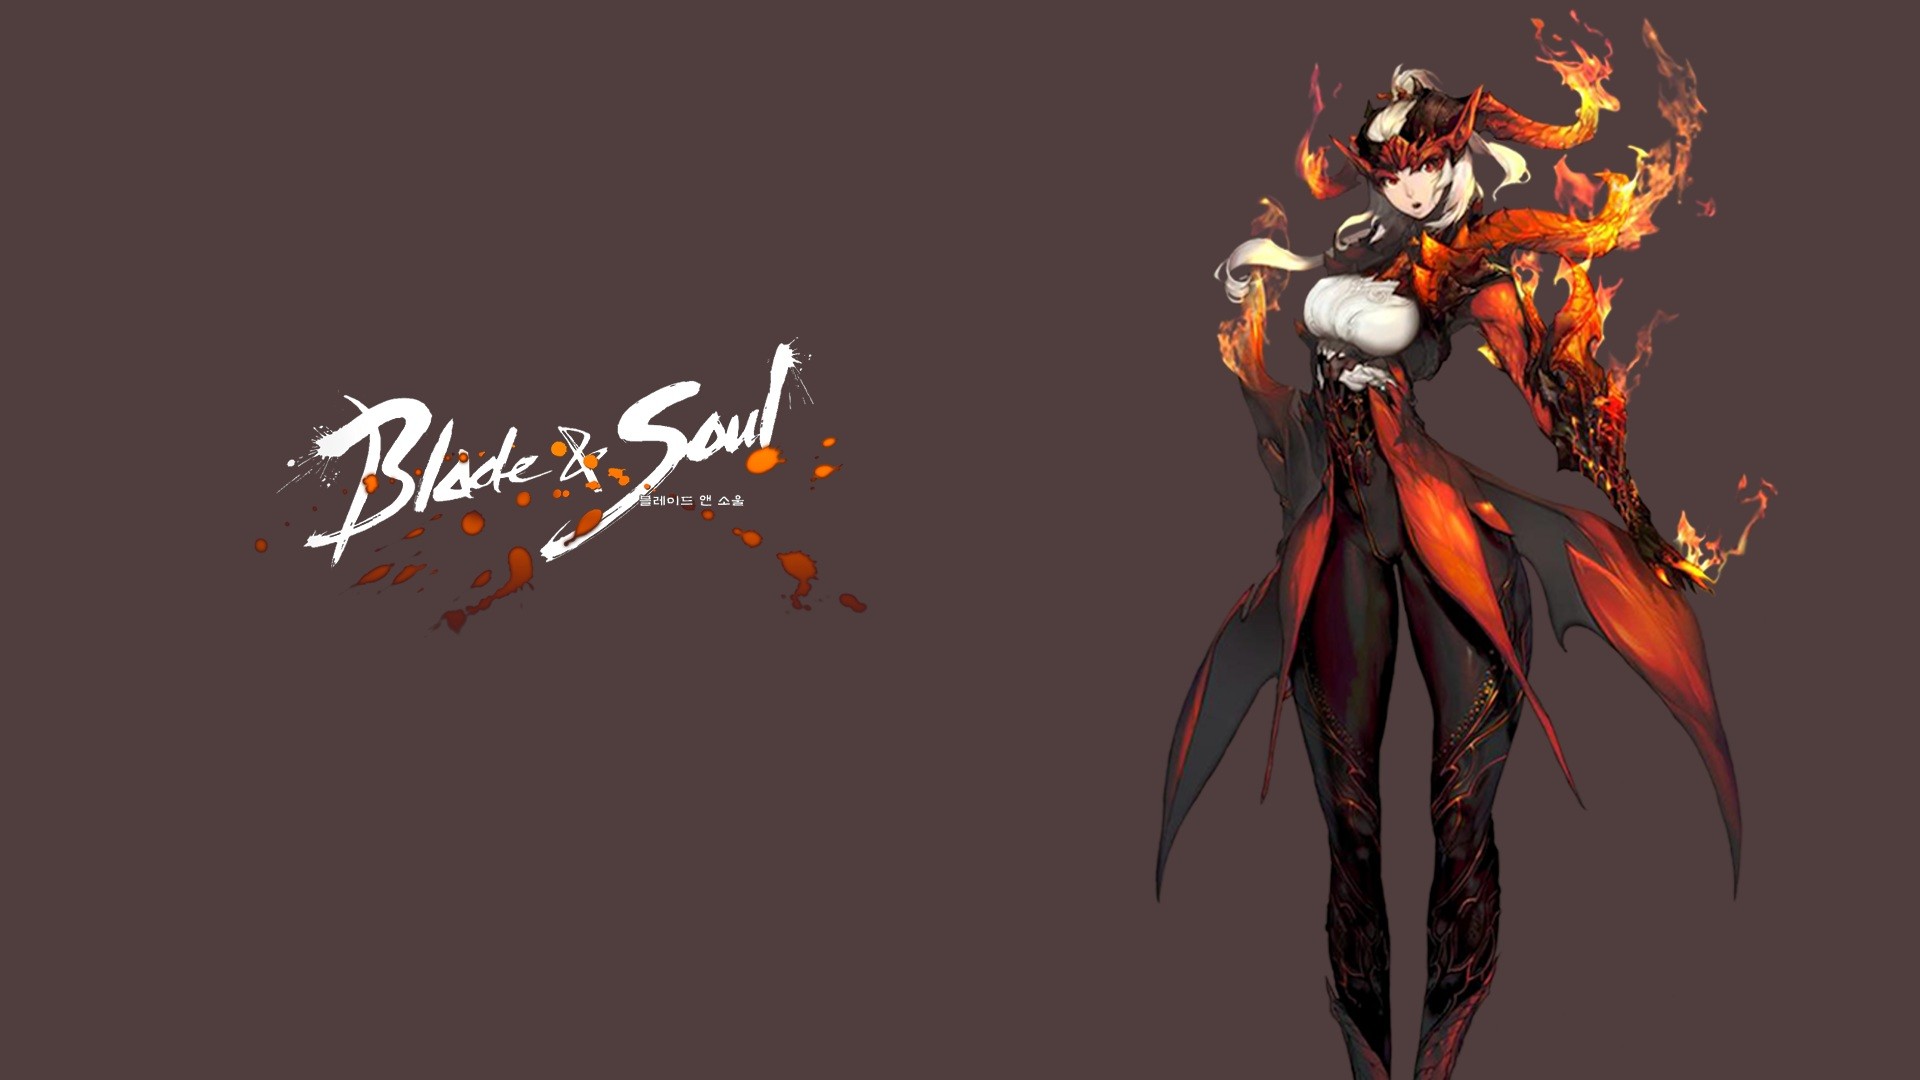 1920x1080 Blade And Soul Hd Game Wallpaper Best Hd Wallpapers Â» Ideas Home .